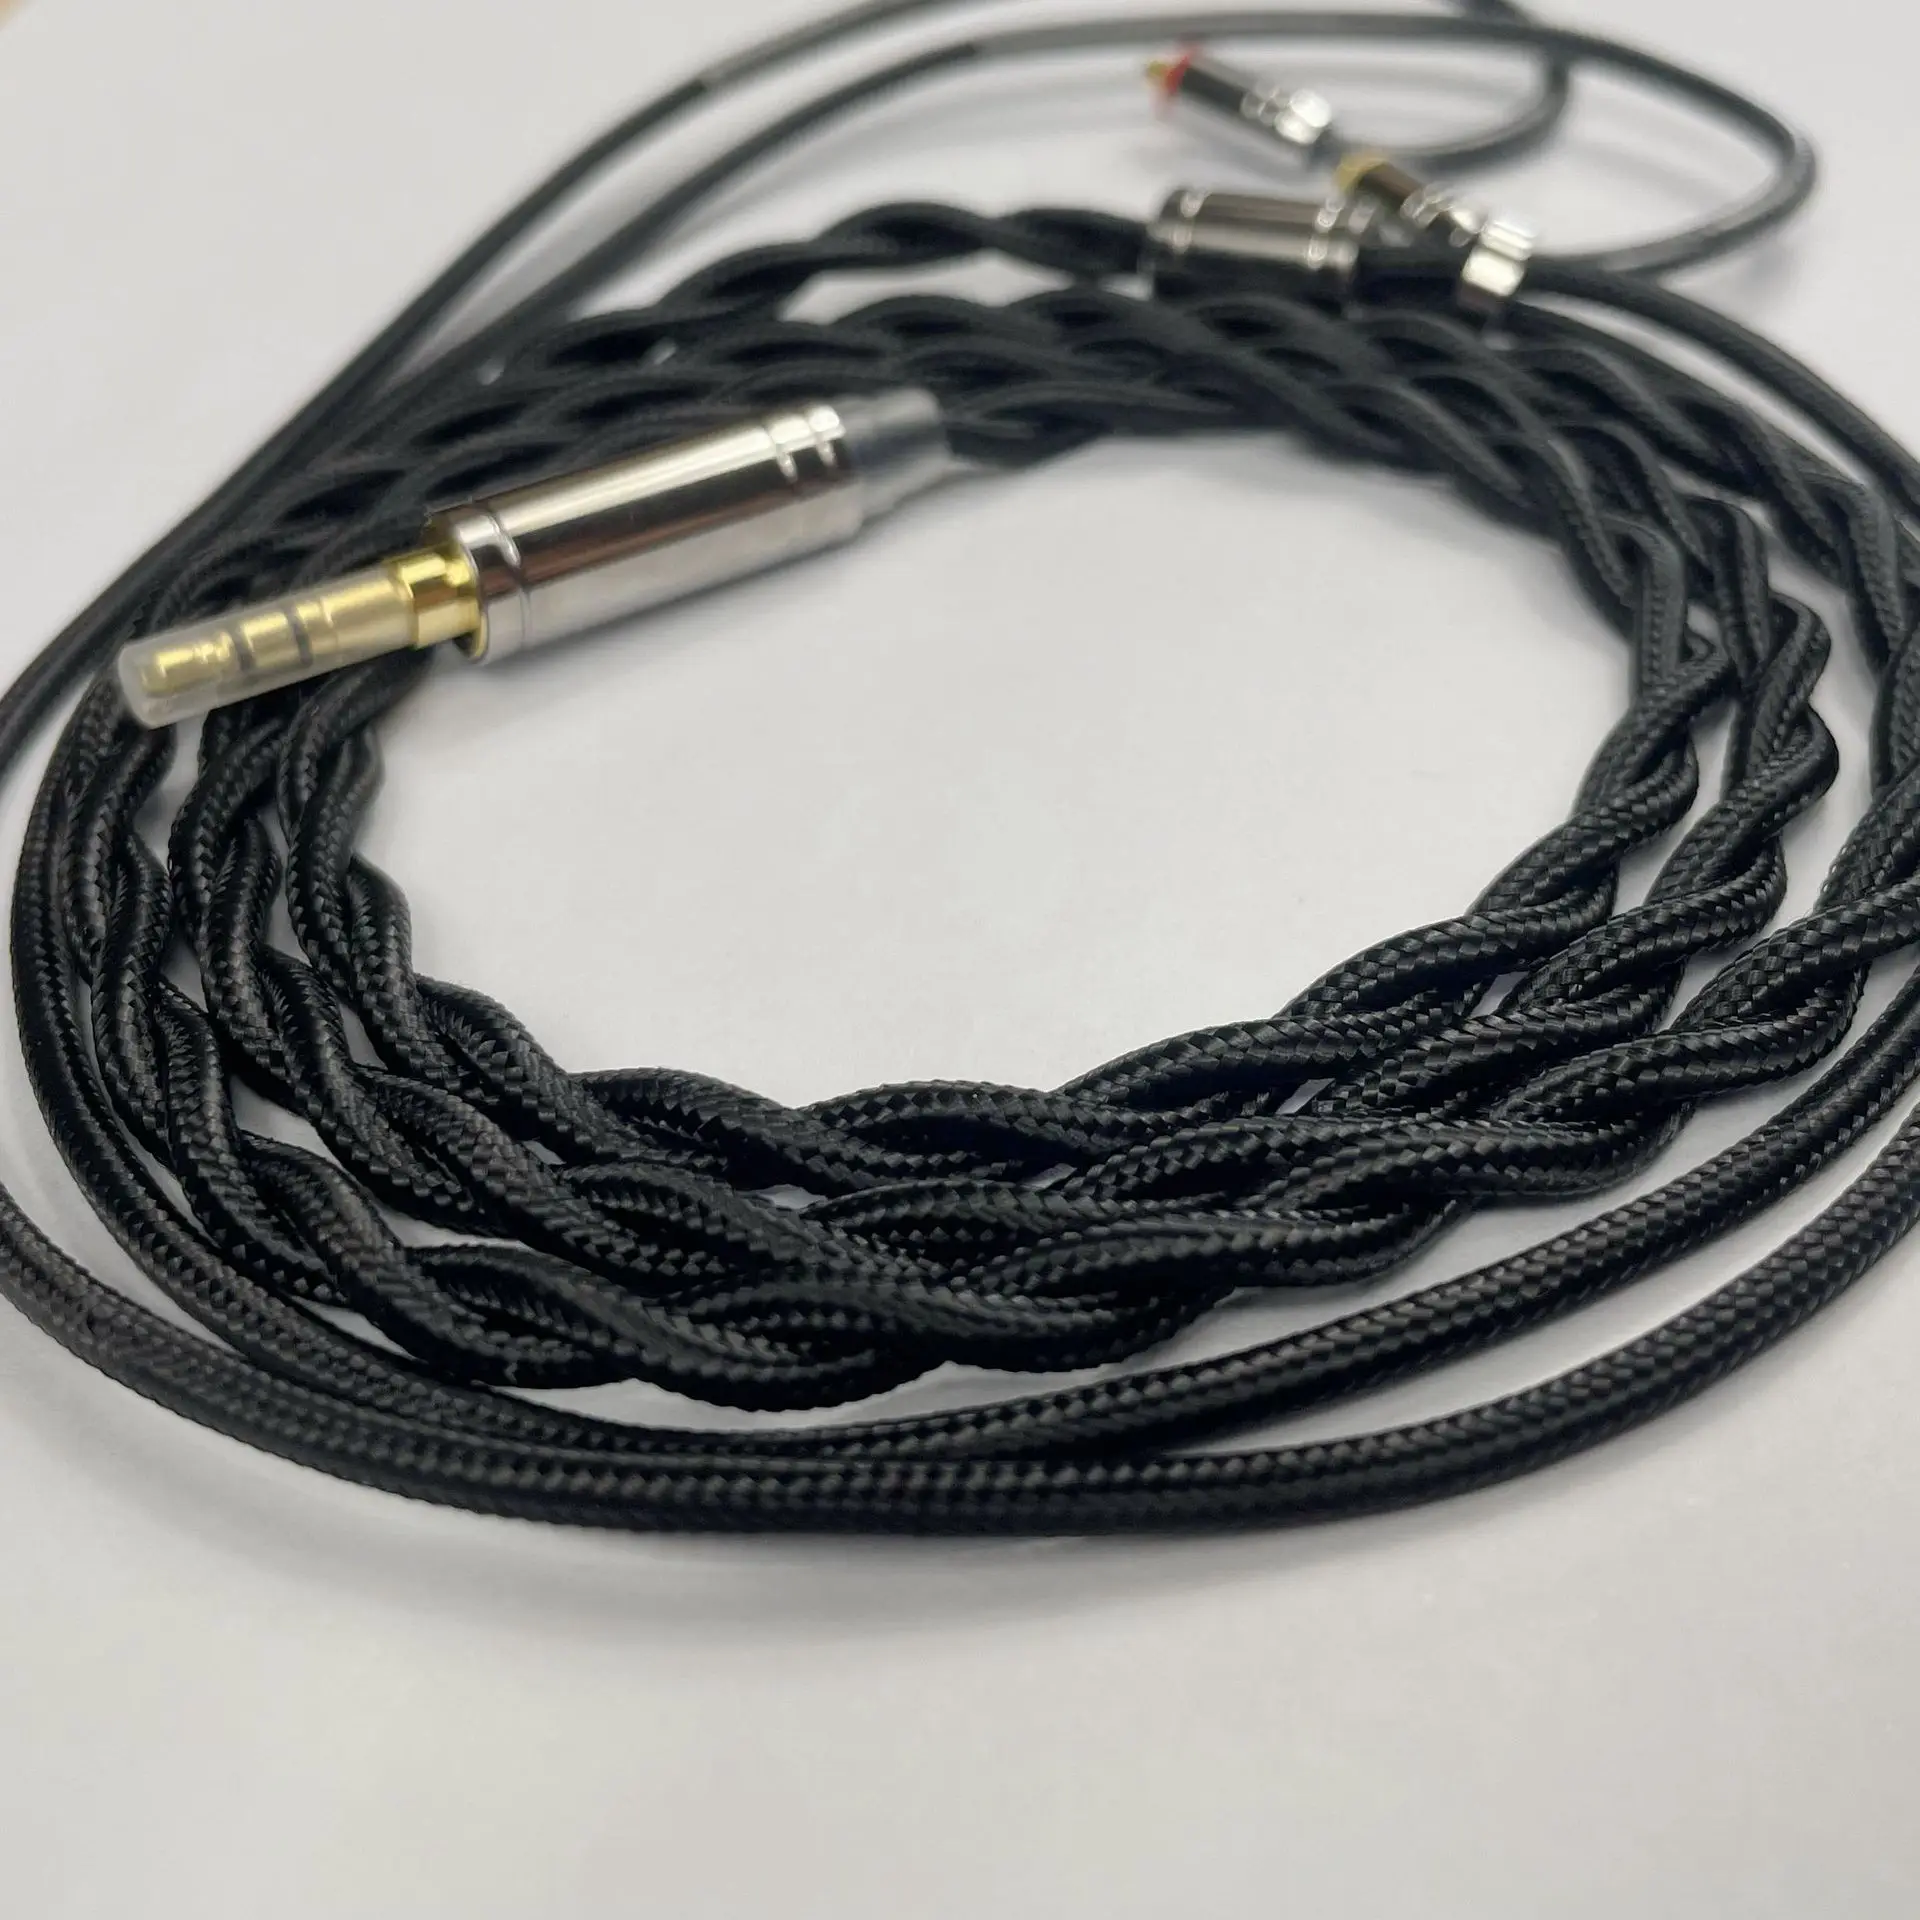 2core black oxygen-free single crystal copper nylon braided coaxial MMCX/0.78/QDC/TFZ headphone upgrade cable iem cable enlarge